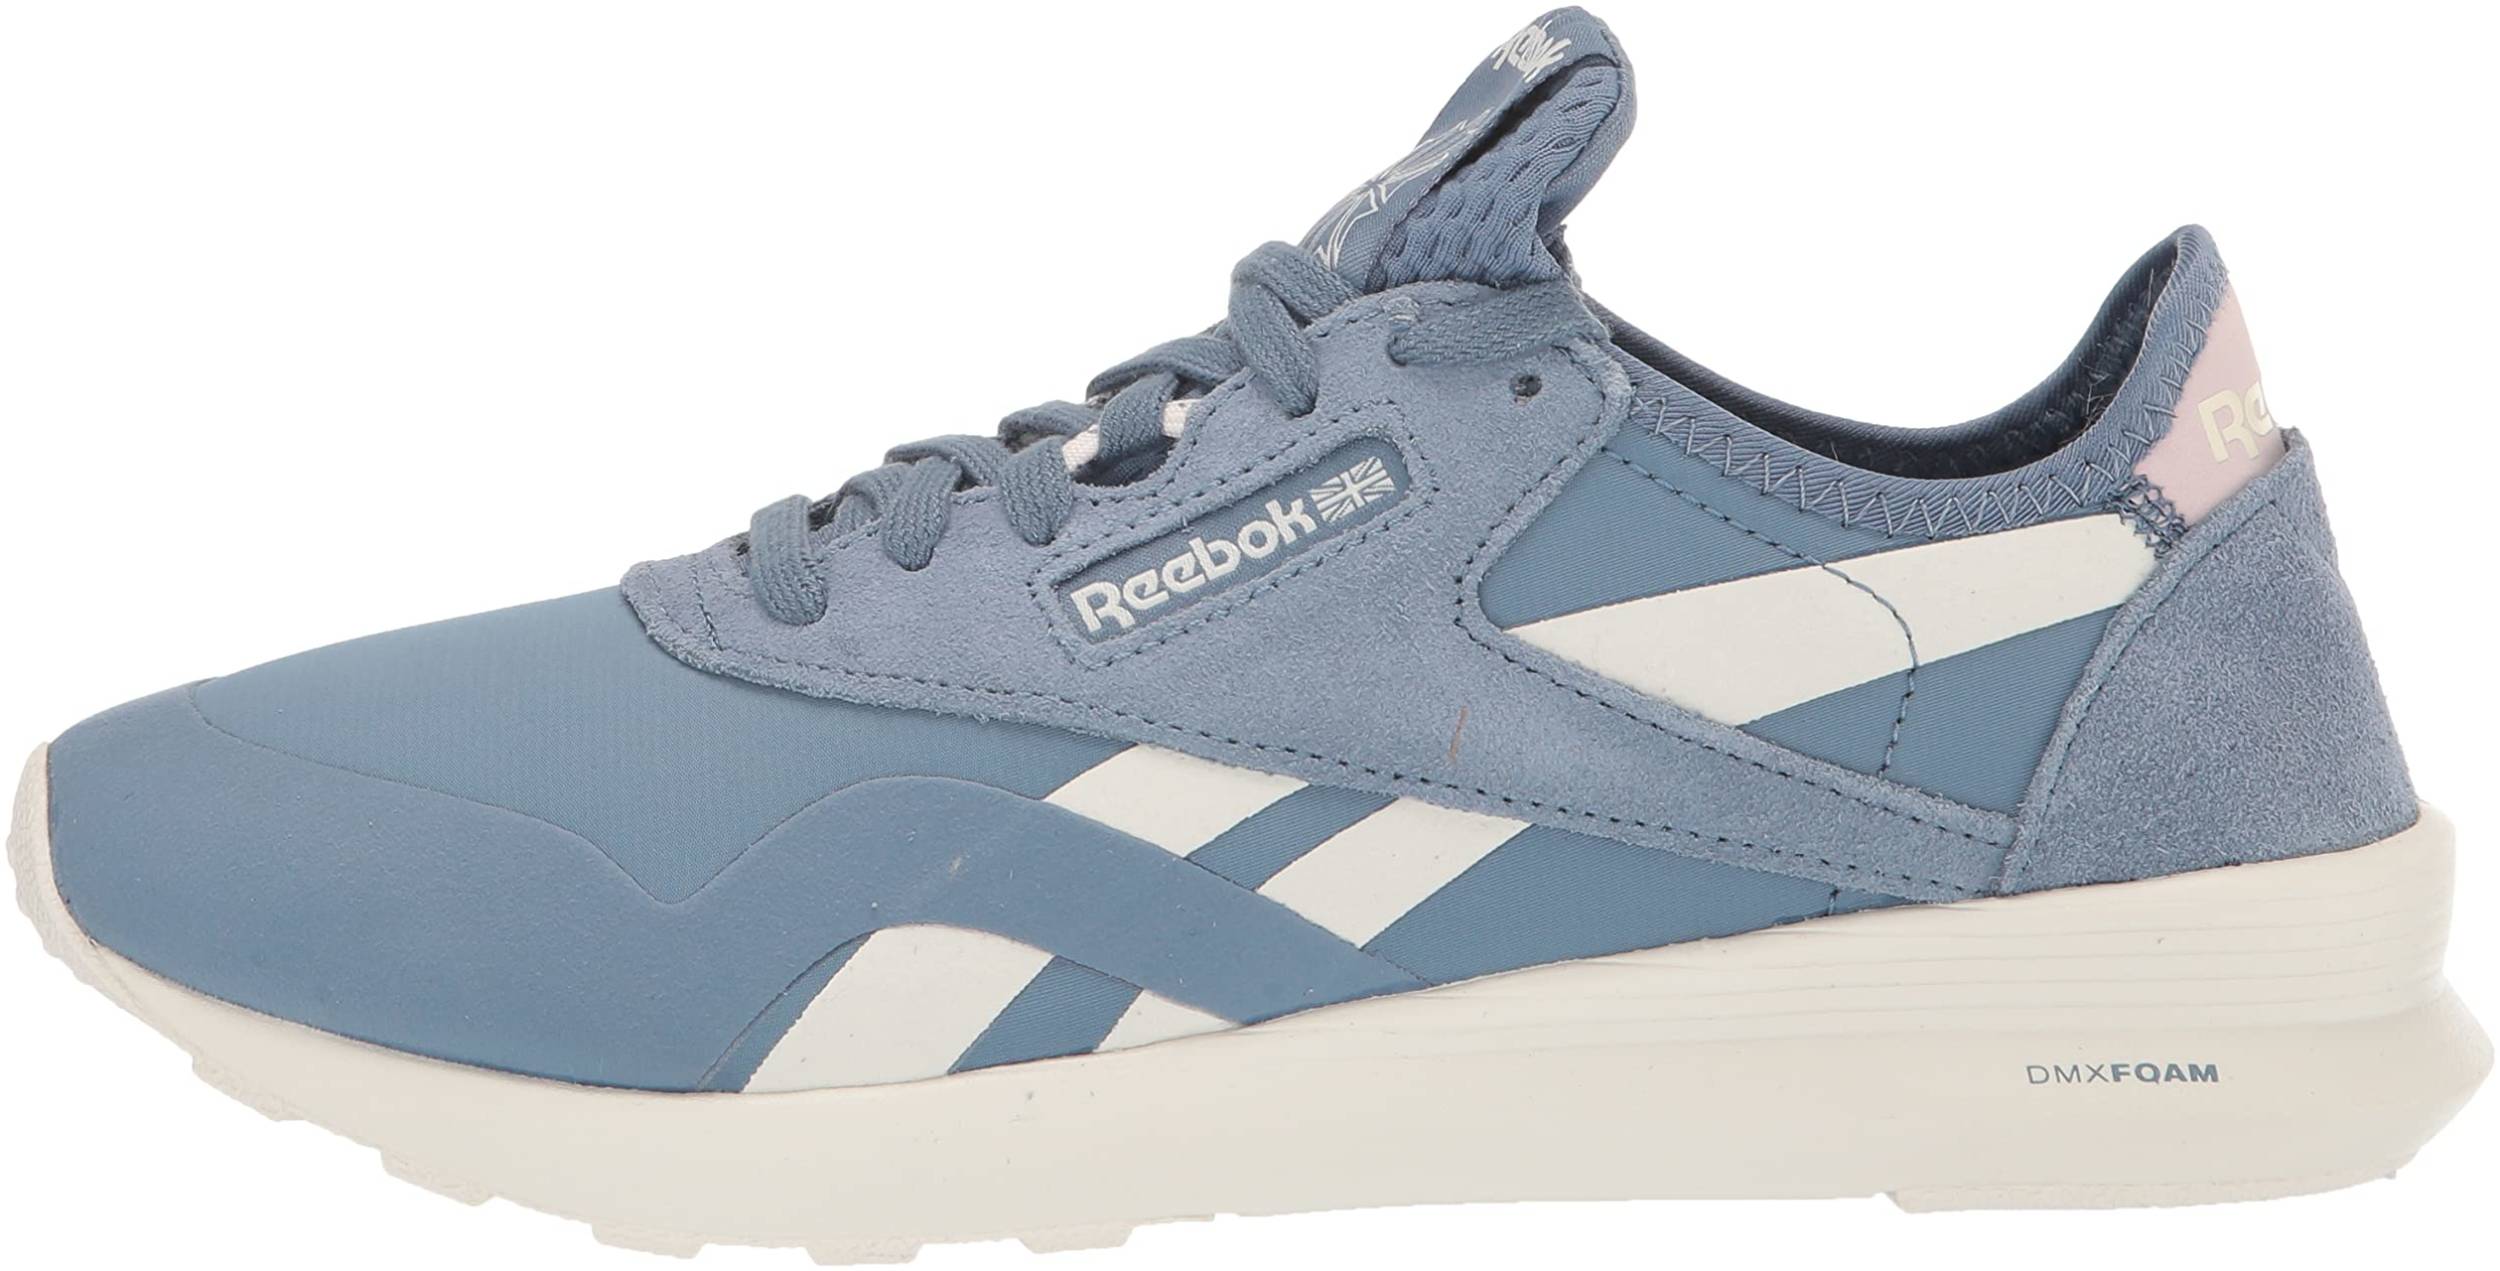 pedal Embezzle Discuss Reebok Classic Nylon SP sneakers in 4 colors (only $23) | RunRepeat